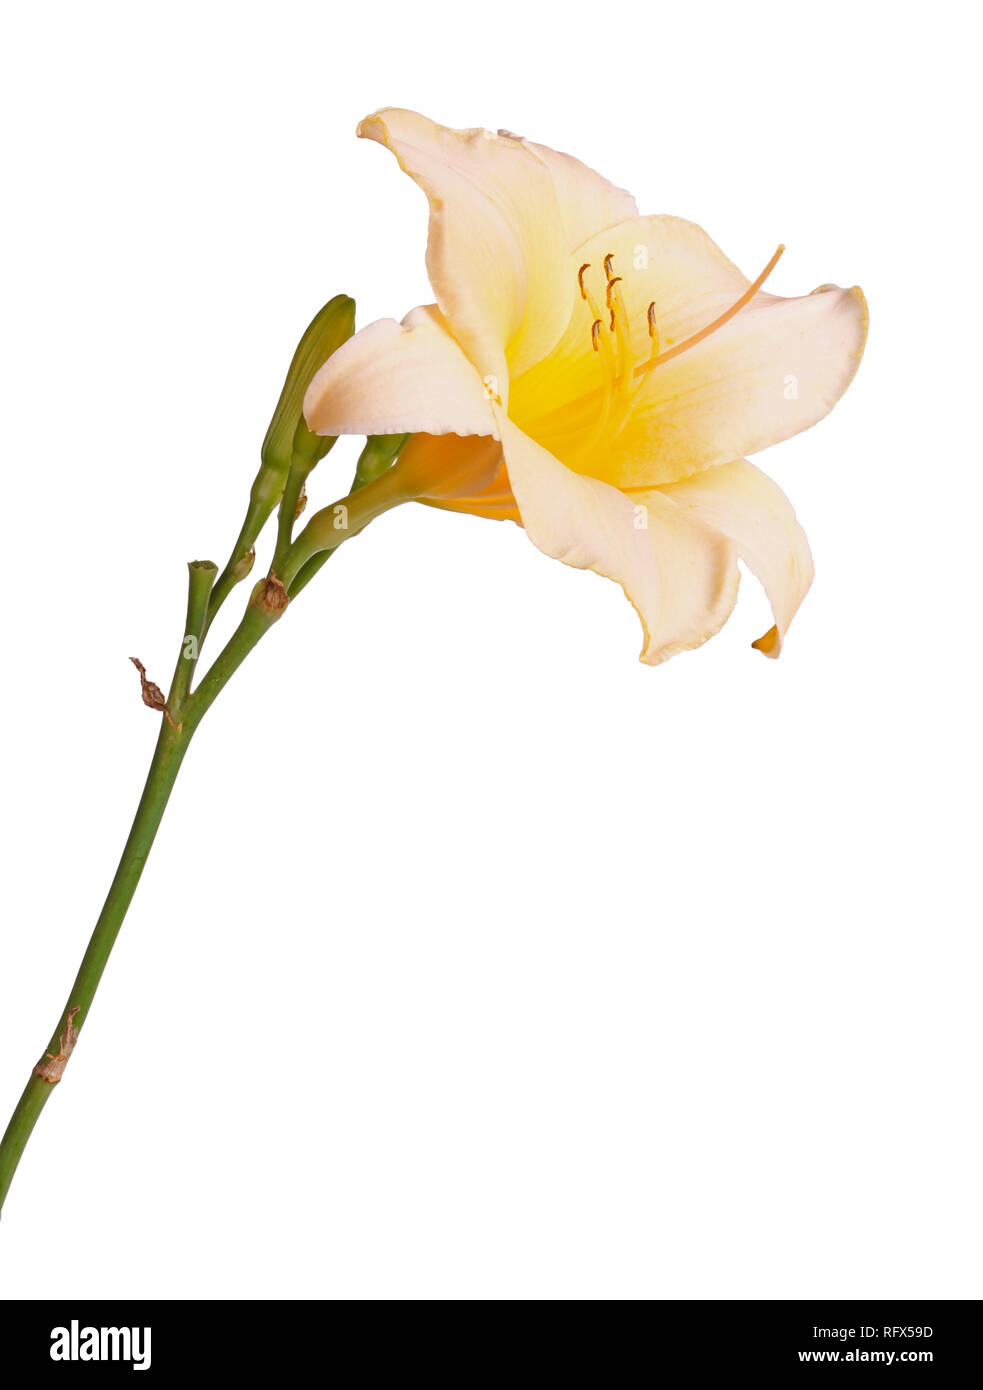 Side view of a single stem with a pink and yellow daylily flower (Hemerocallis hybrid) plus unopened buds isolated against a white background Stock Photo